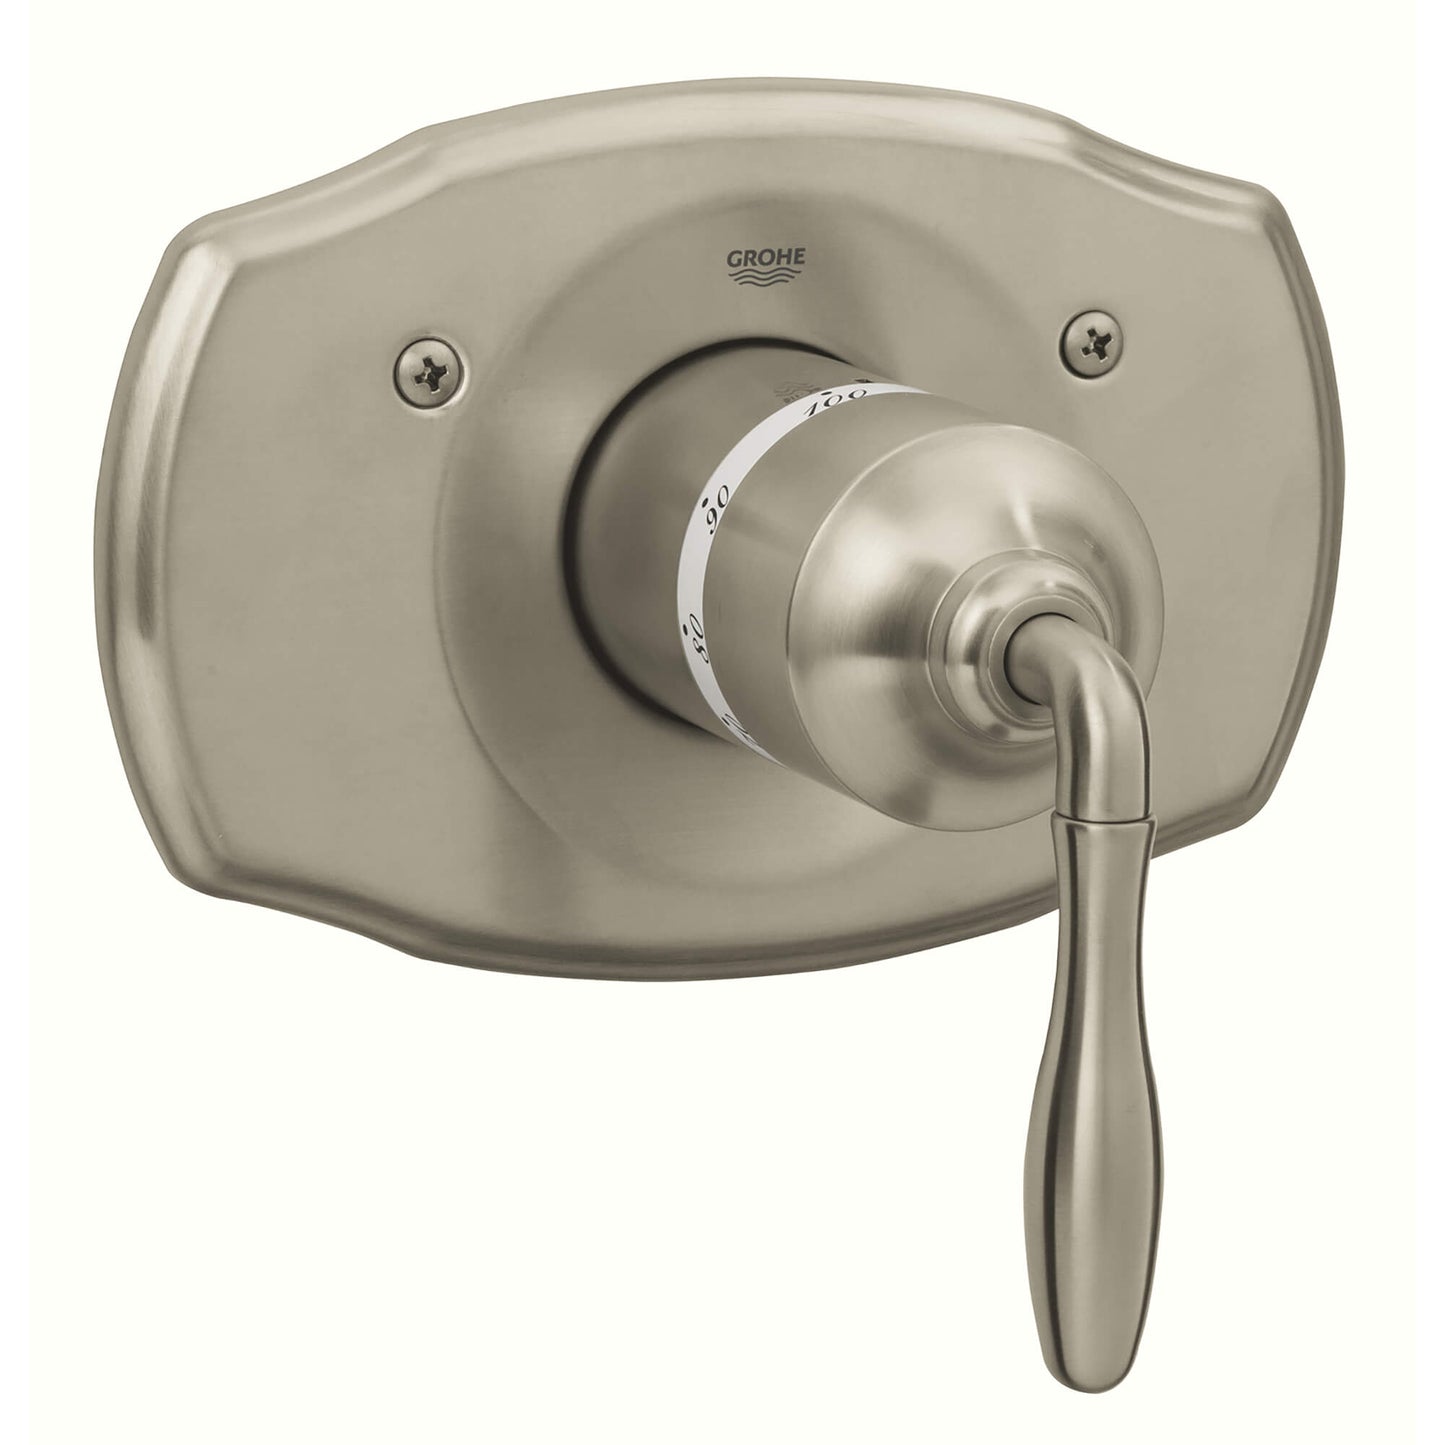 GROHE 19614EN0 Seabury Brushed Nickel Central Thermostatic Valve Trim